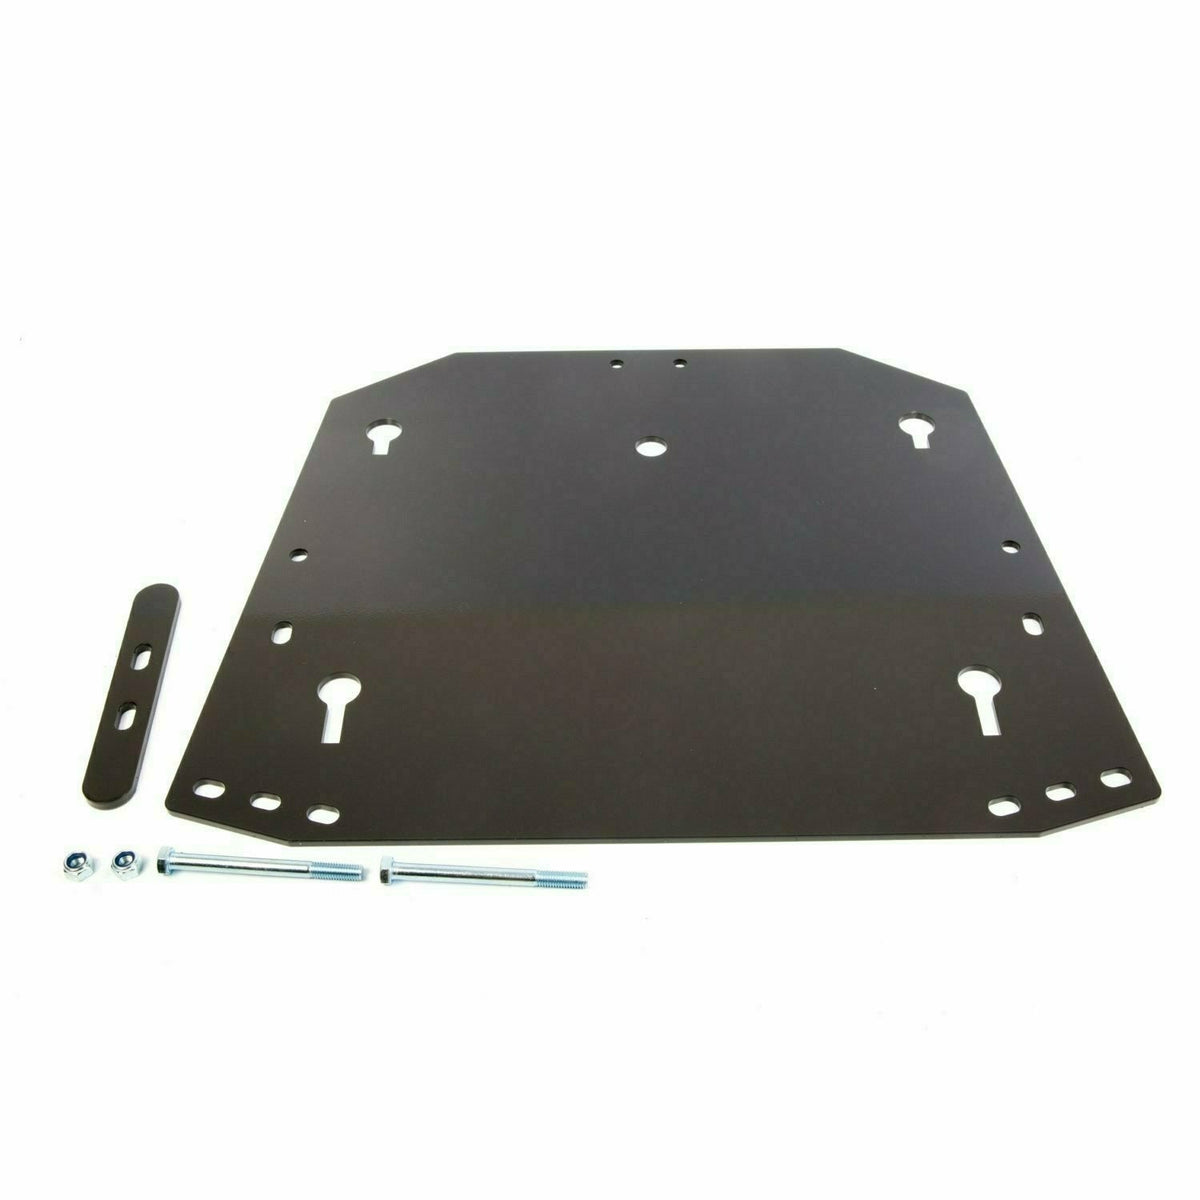 Kimpex Can Am Commander Click N Go 2 Plow Mounting Bracket